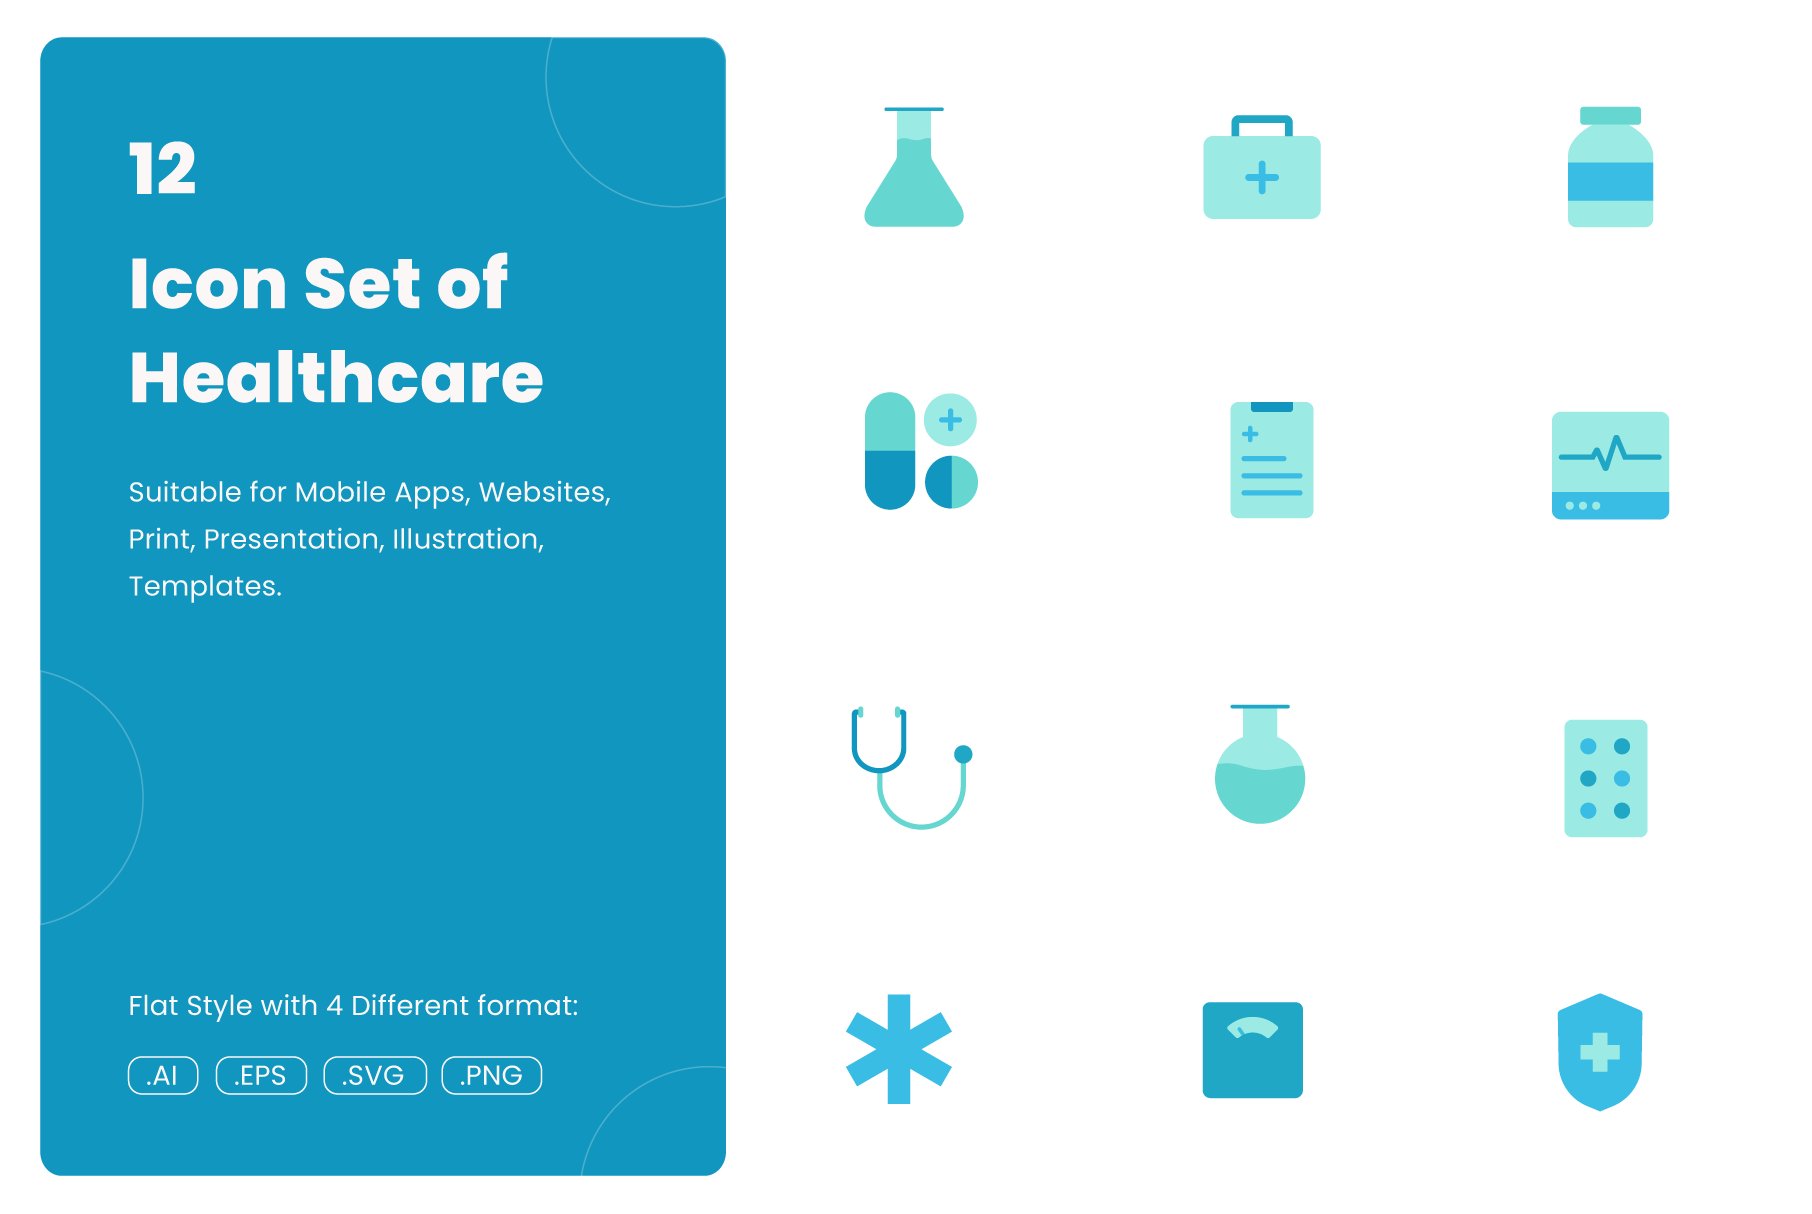 12 Icon Set of Healthcare cover image.